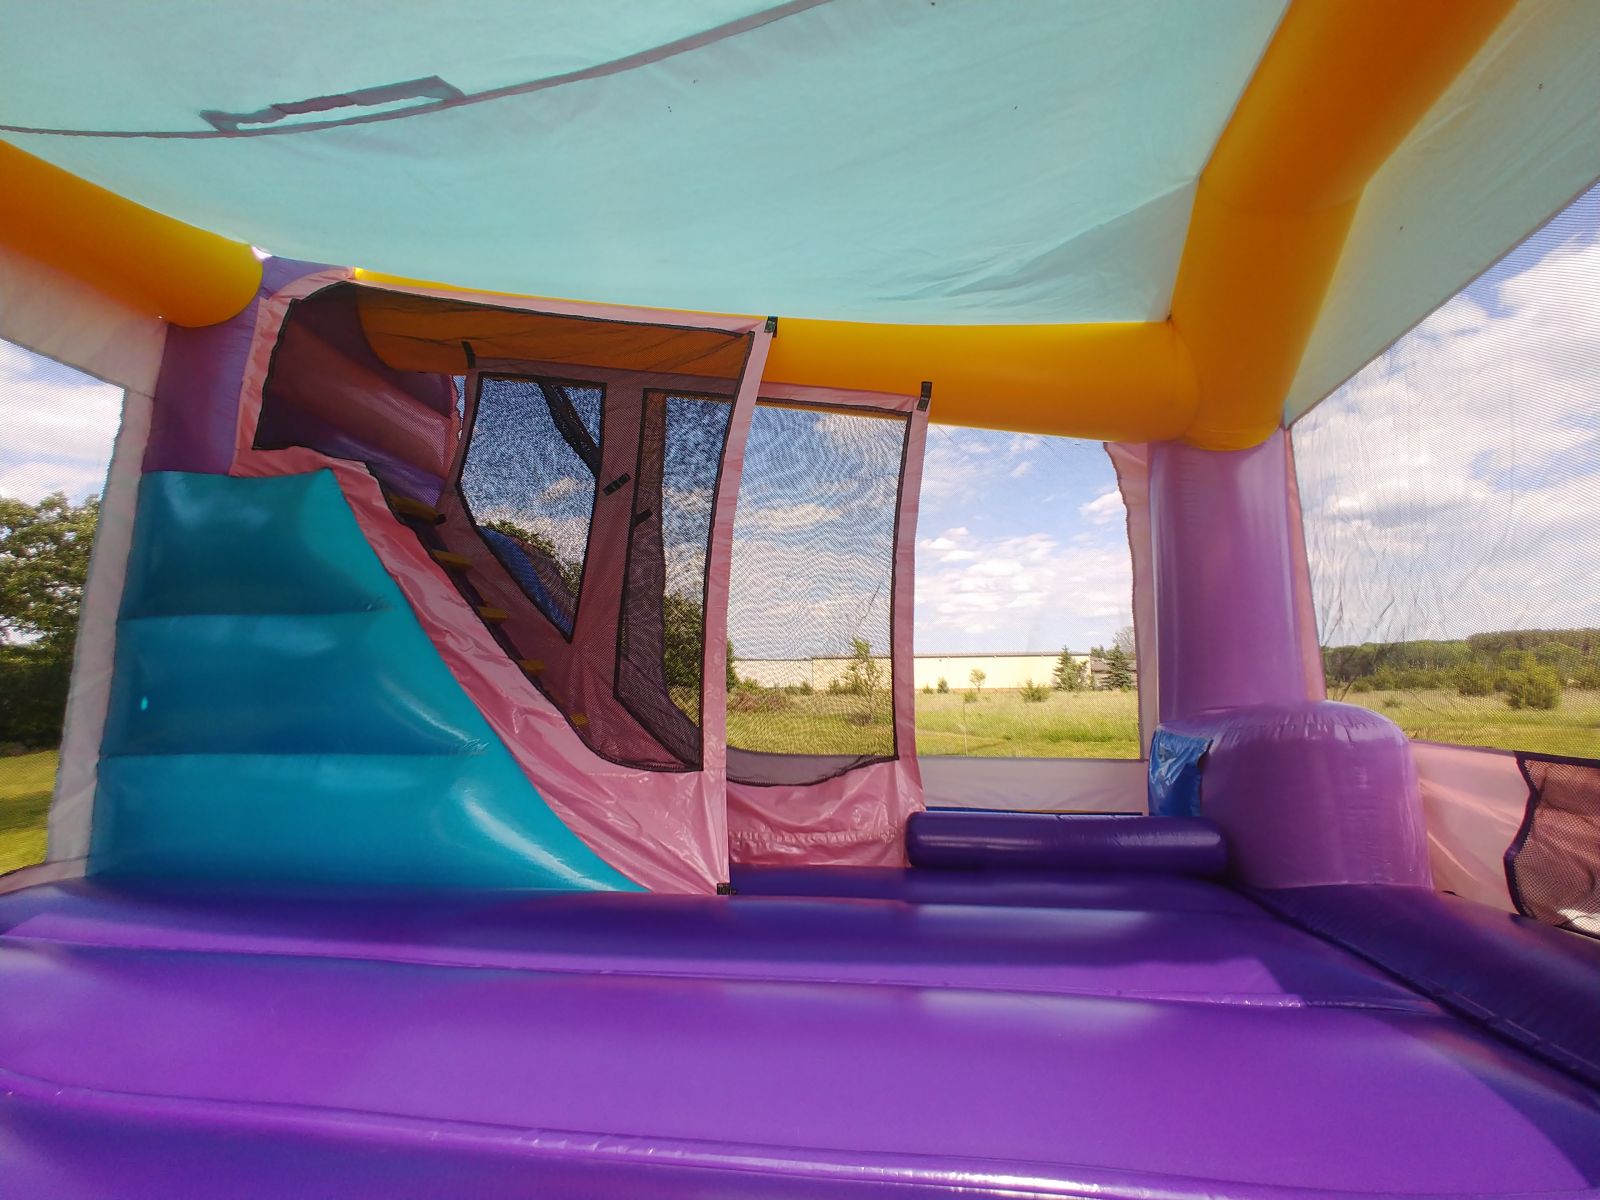 Interior view of slide and climbing wall area inside bounce house rental from Froggy Hops